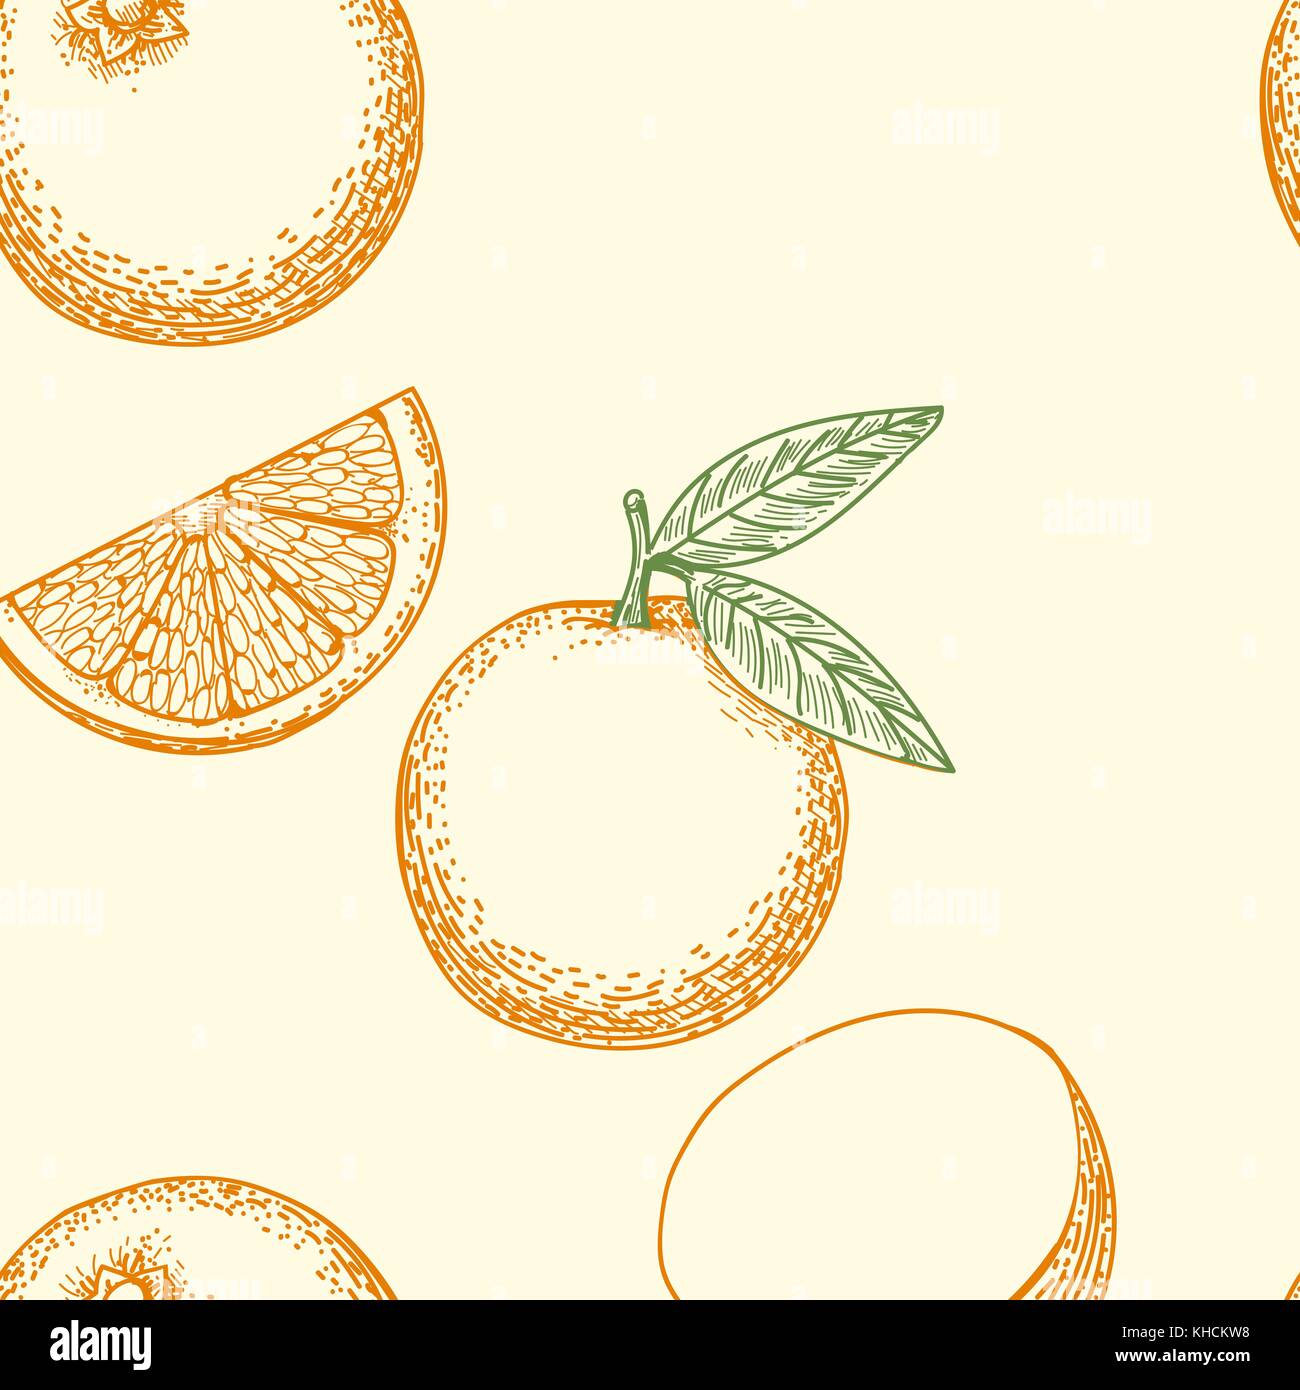 Orange fruit hand drawn pattern. Yellow oranges, green leaves and flowers seamless background pattern vector drawing Stock Vector